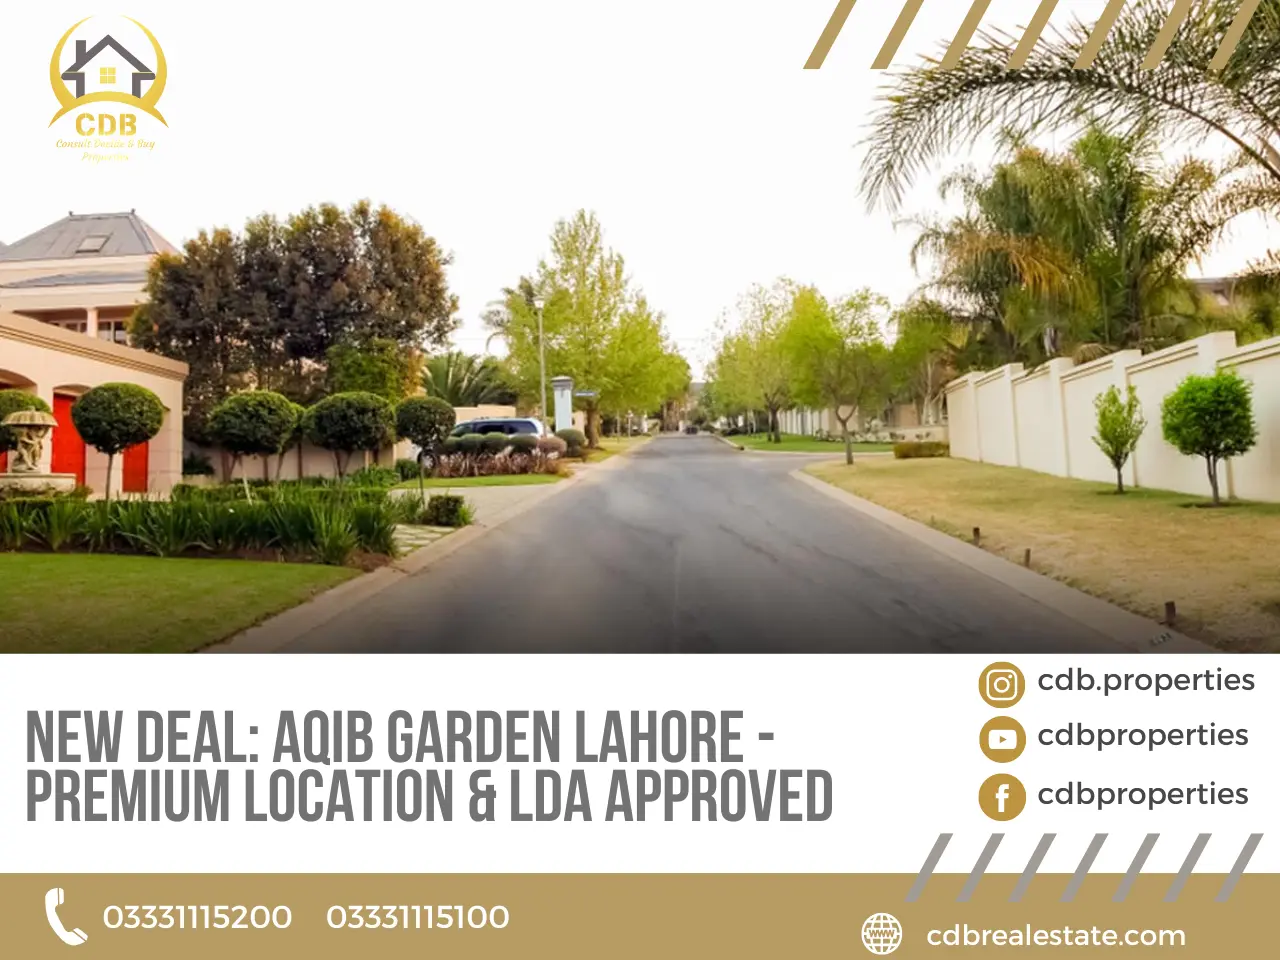 House and Road in Aqib Garden Lahore